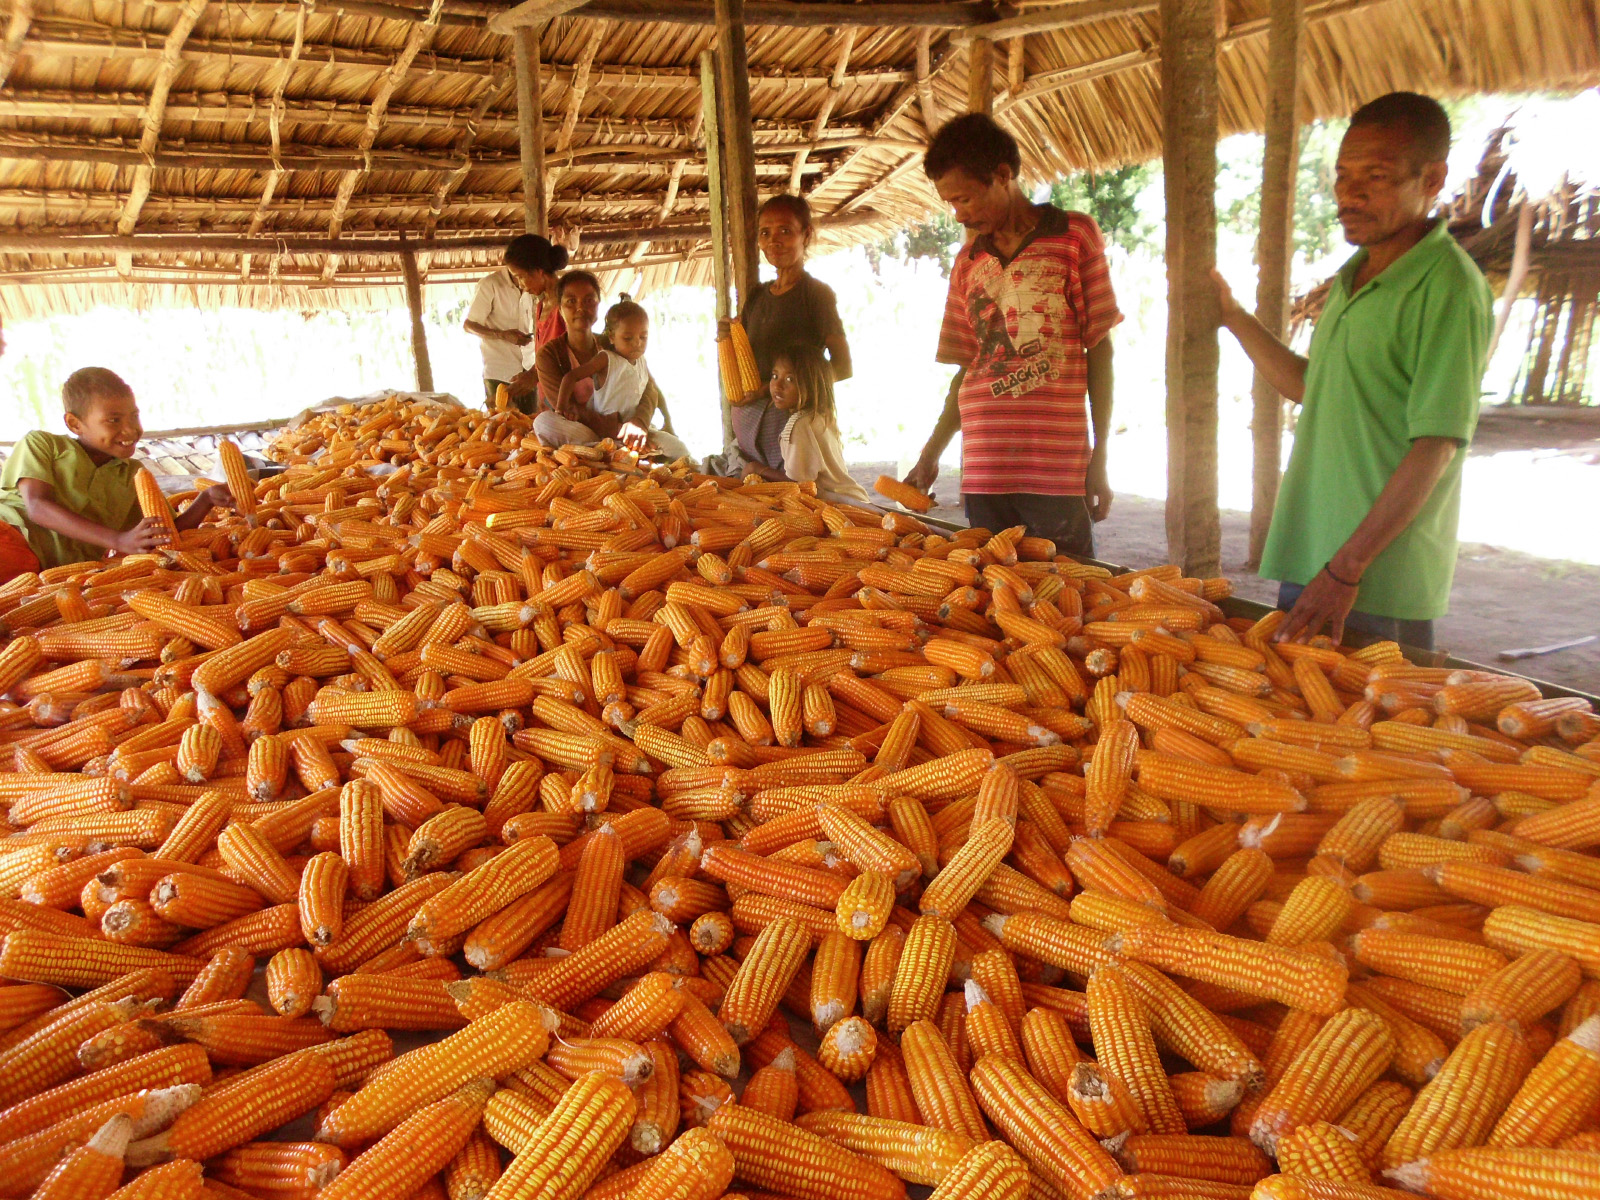 Small shops selling surplus crops are lifting people out of poverty.